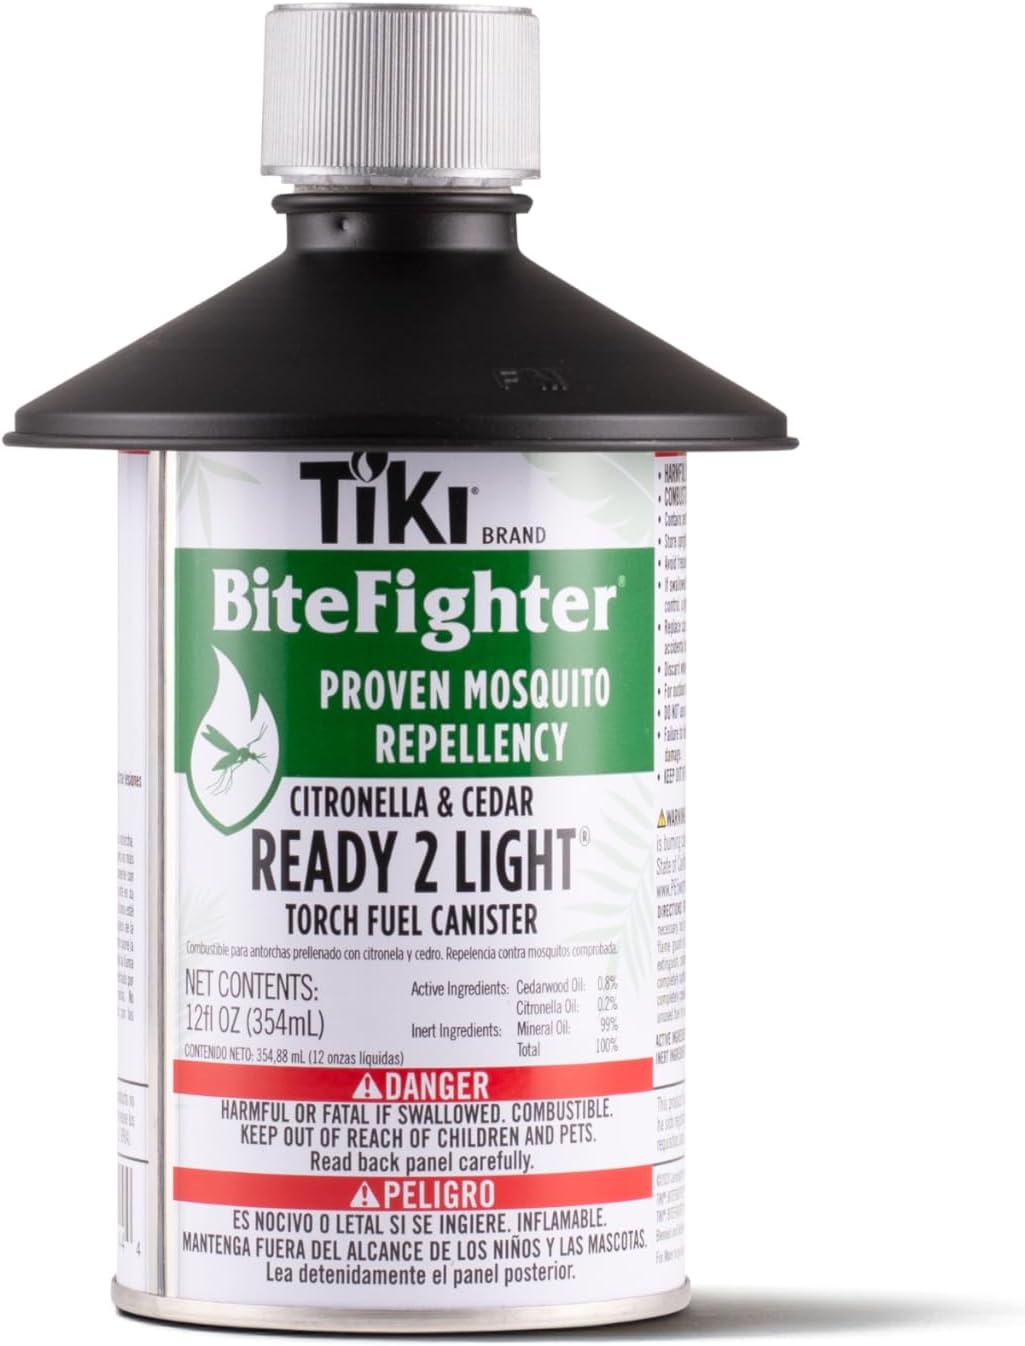 Make your outdoor space easy to use and ready at a moments notice. Prefill your torches with BiteFighter Torch Fuel, and youll be relaxing peacefully in no time. No matter the event, your backyard can be ready for it all!